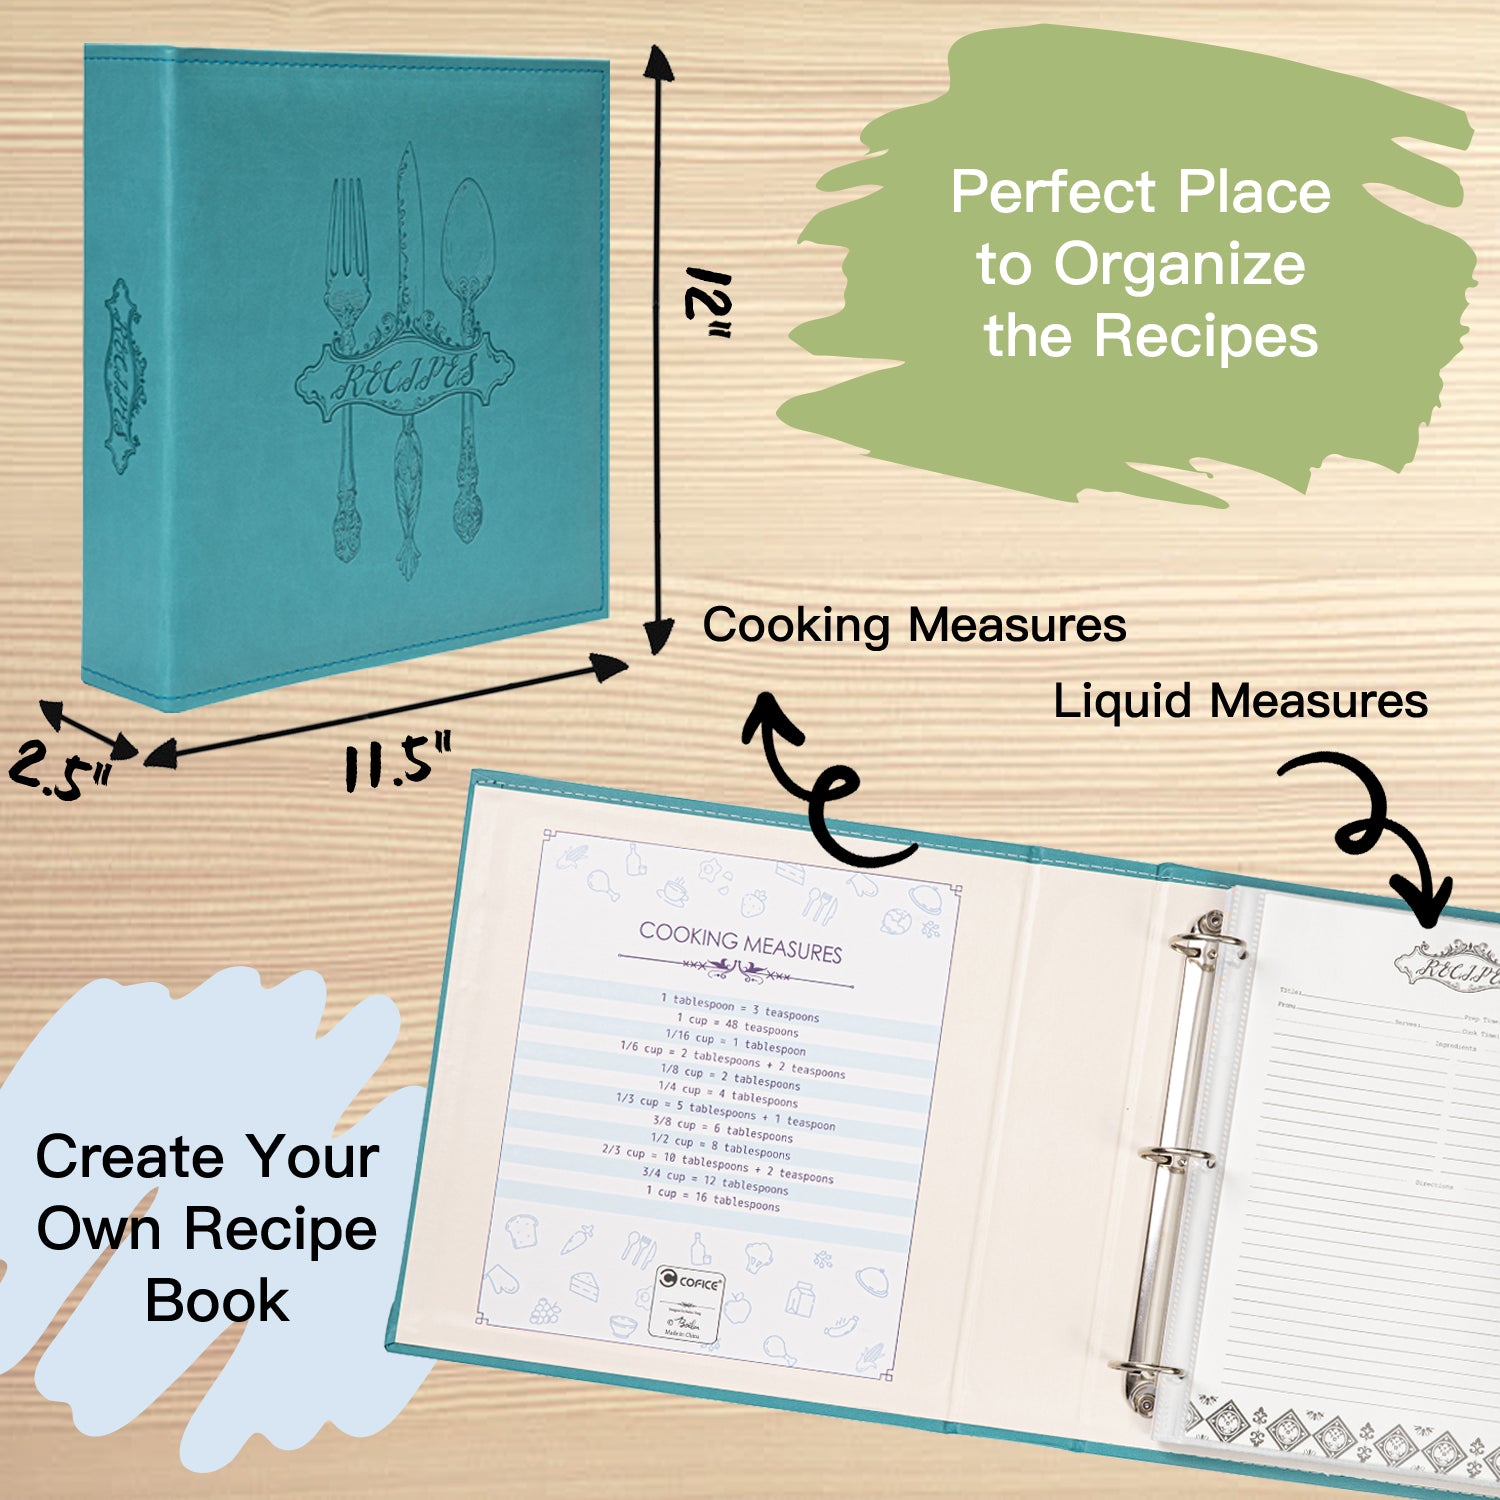 Recipe Book To Write In Your Own Recipes: Create Your Own Recipe